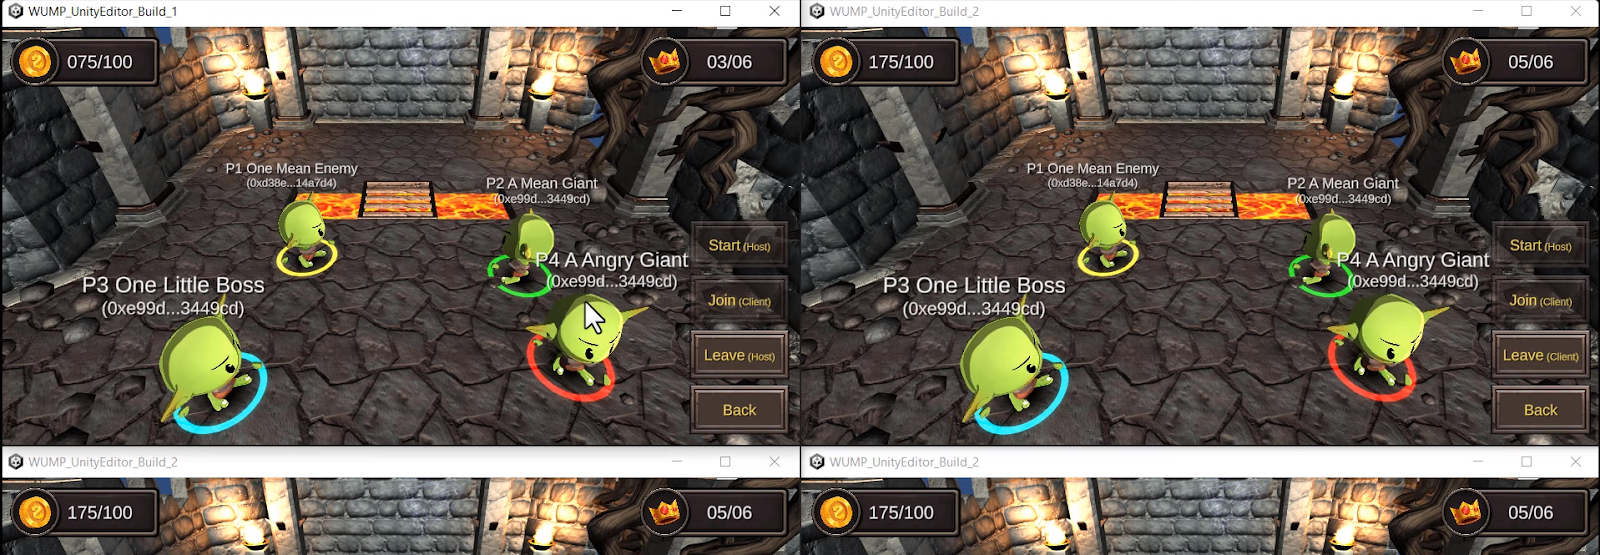 Showing the player's updated balance.